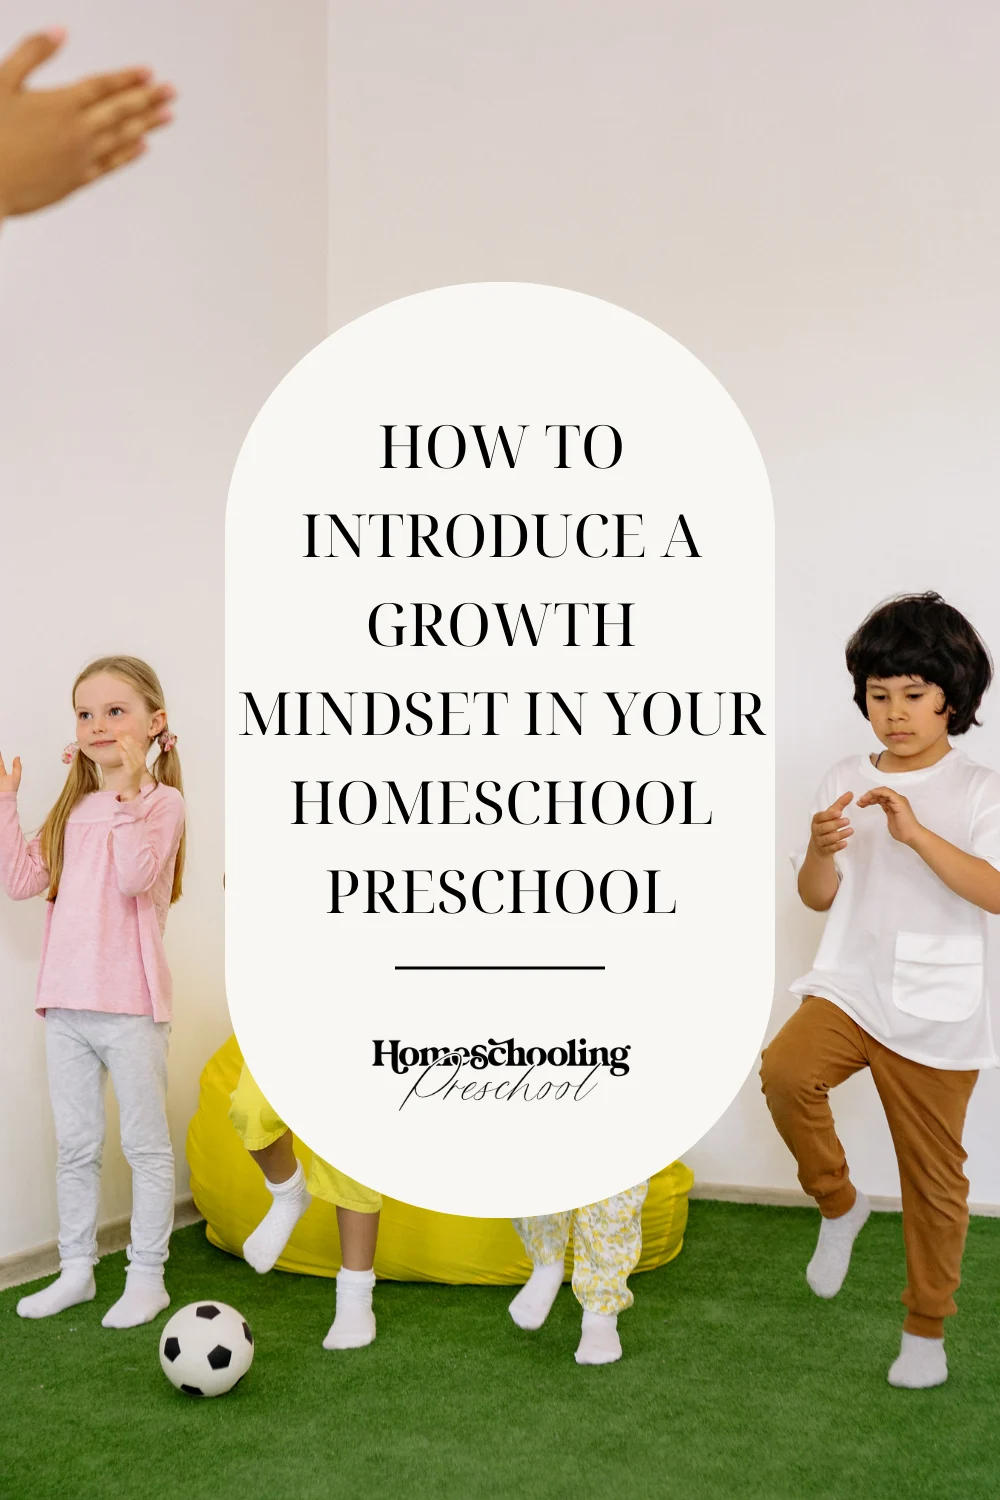 How to Introduce a Growth Mindset in Your Homeschool Preschool